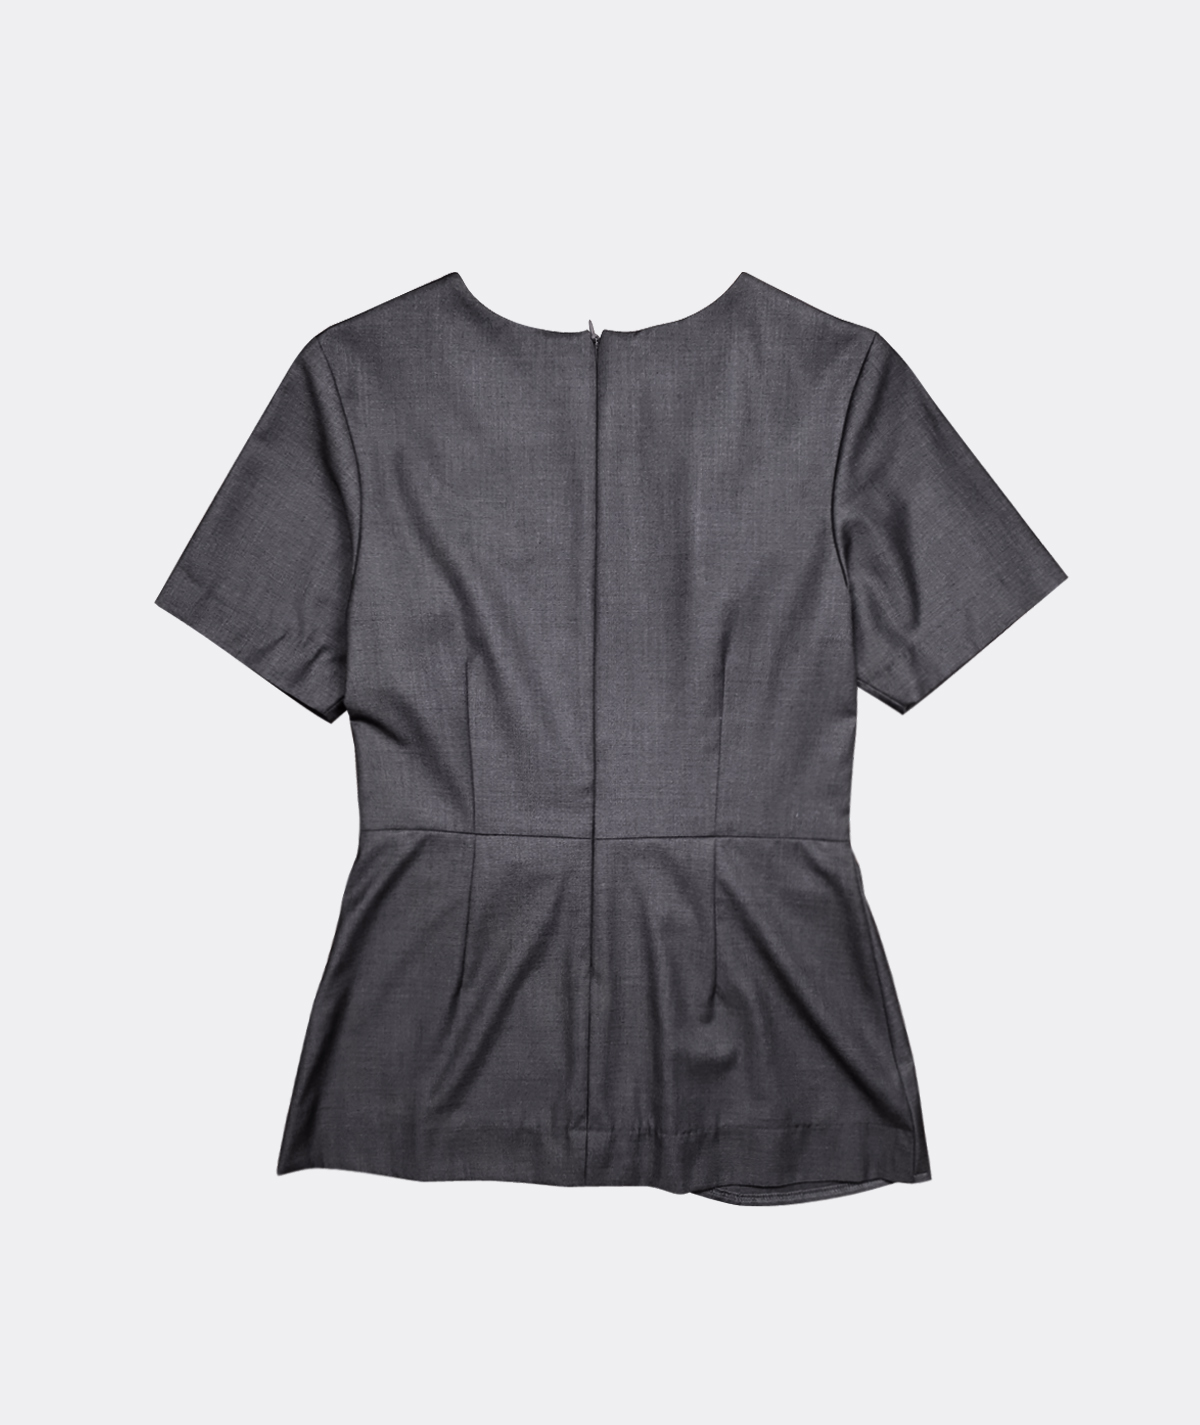 beauty therapist uniform beauty blouse ladies therapist top grey and black back view